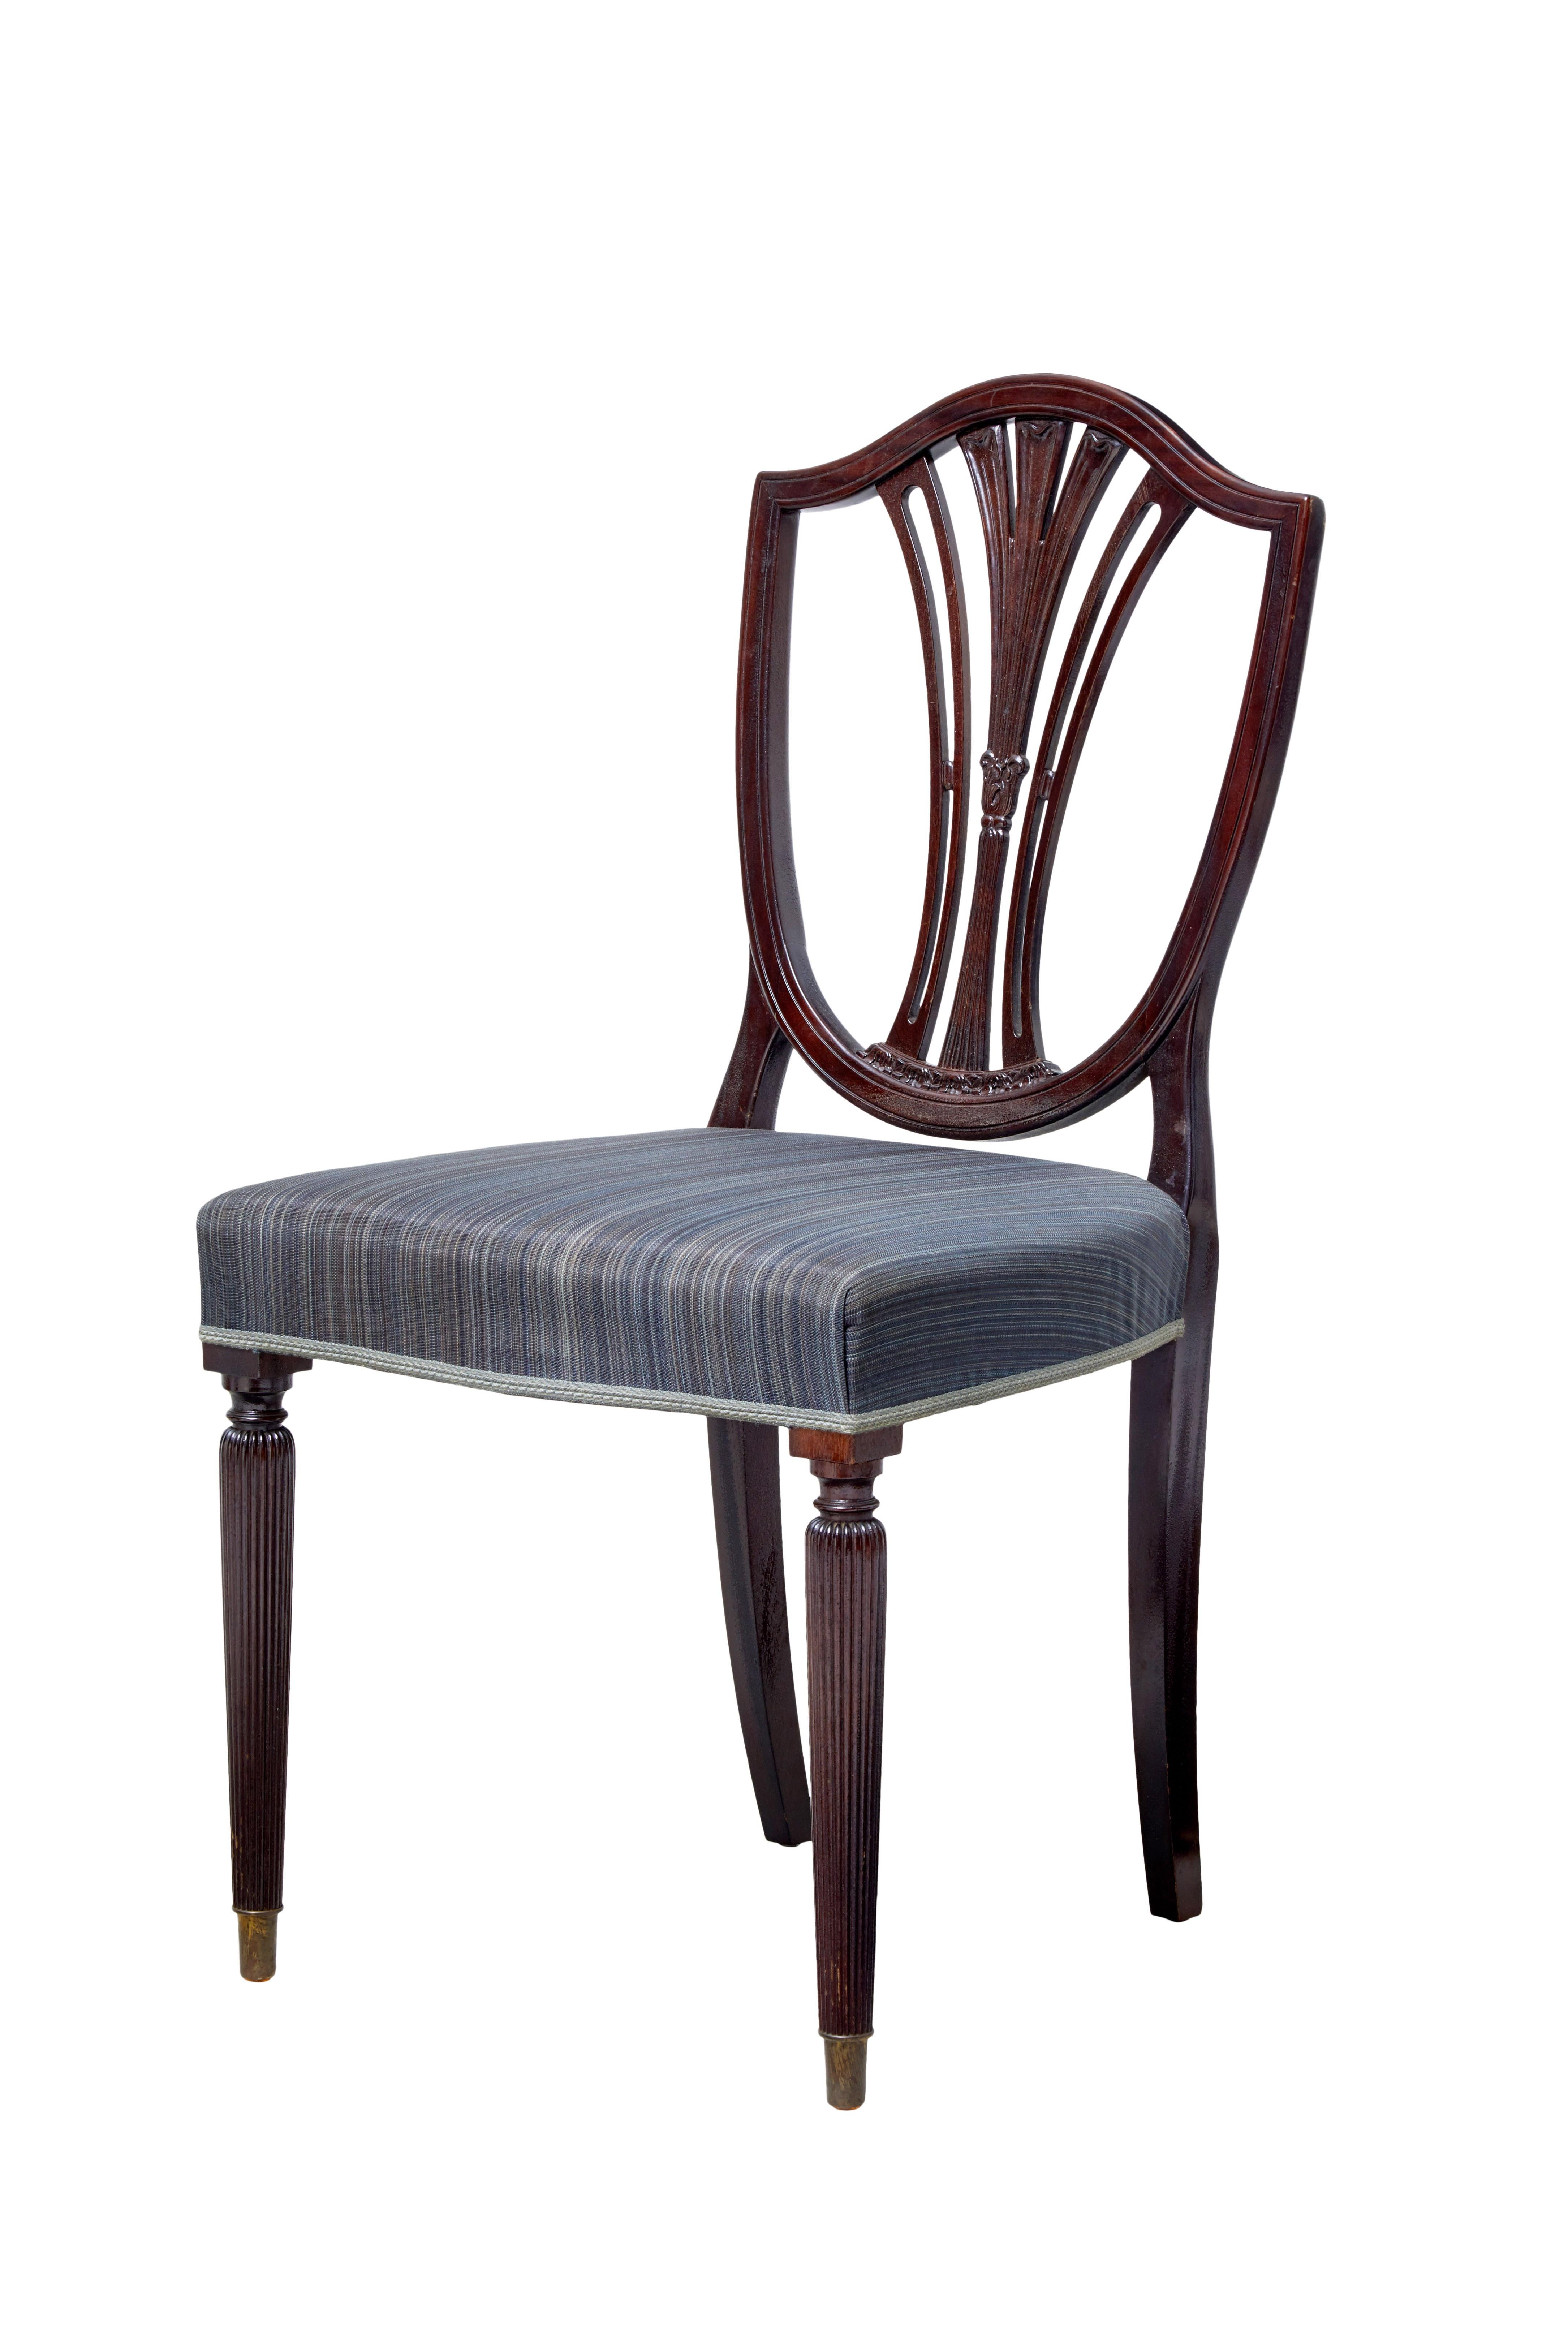 Sold as a set of ten but in fact there is 11 of these chairs in this set, circa 1900.

Desirable shield back rests with pierced detailing. Over stuffed seats.

Standing on front fluted legs and tapering back legs.

Ideally in need of